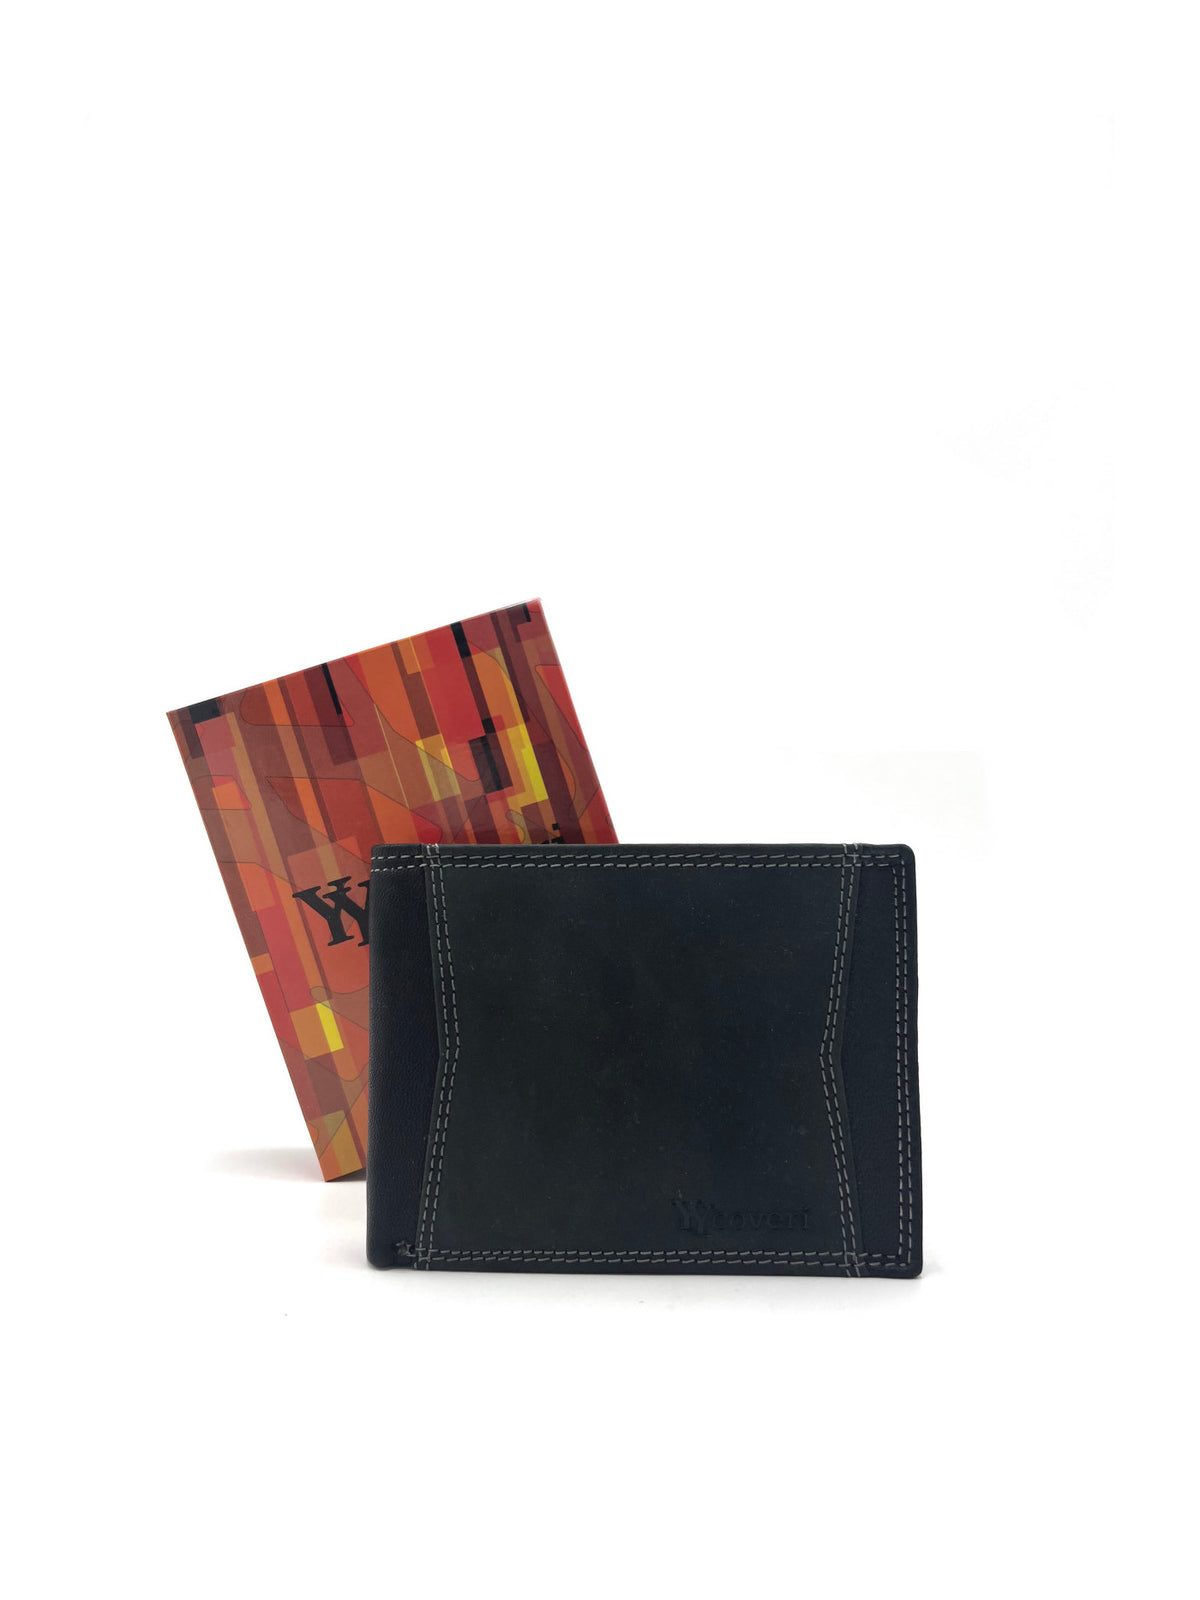 Genuine leather wallet for men, Brand You Young Coveri, art. NEPI1161.422